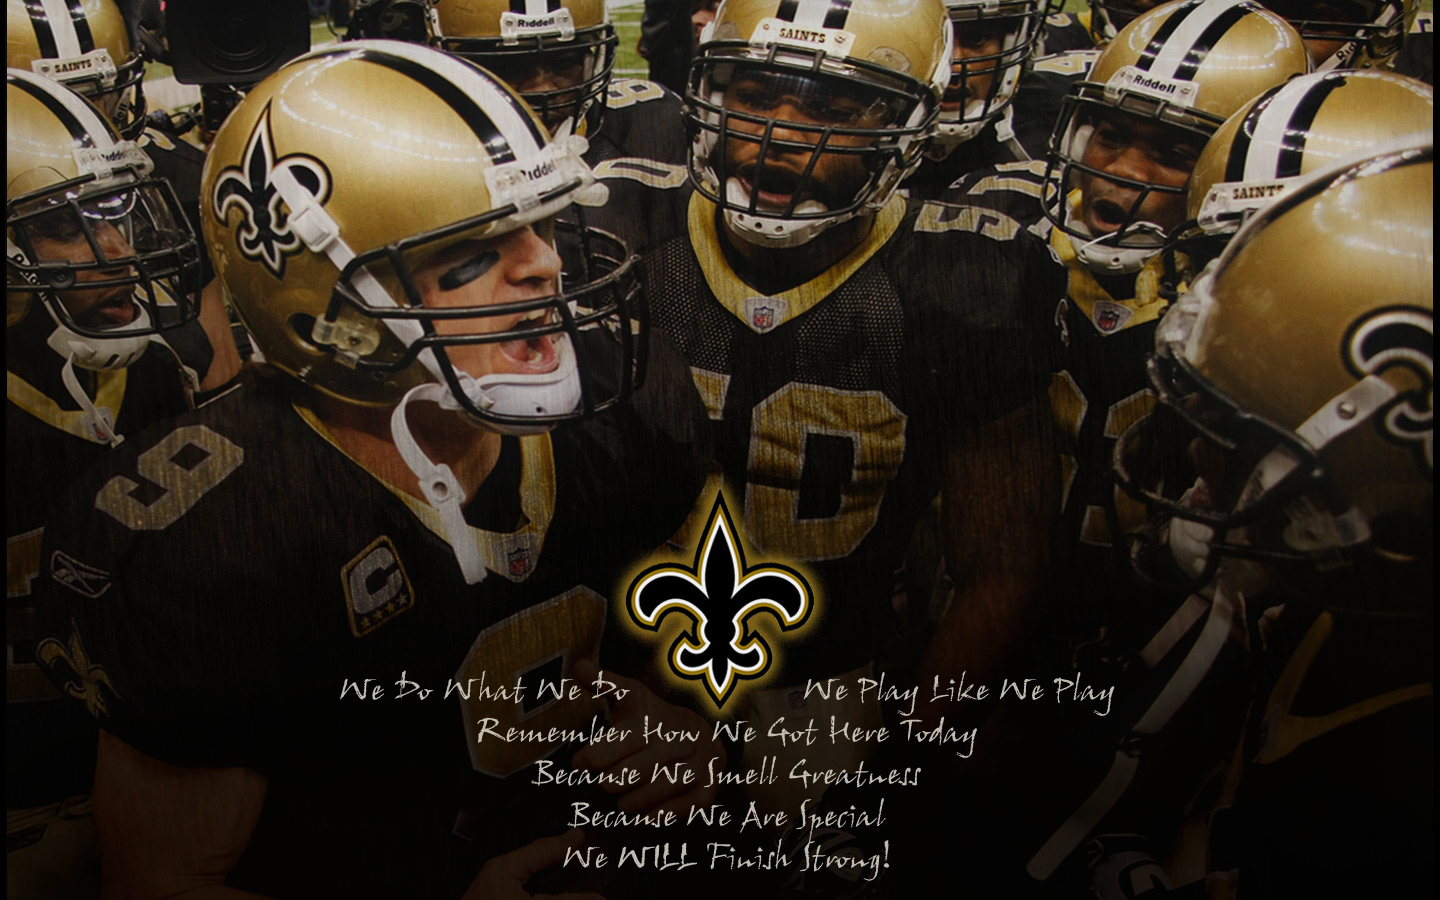 Nfl Saints Huddle Greatness By Yurintroubl Photo